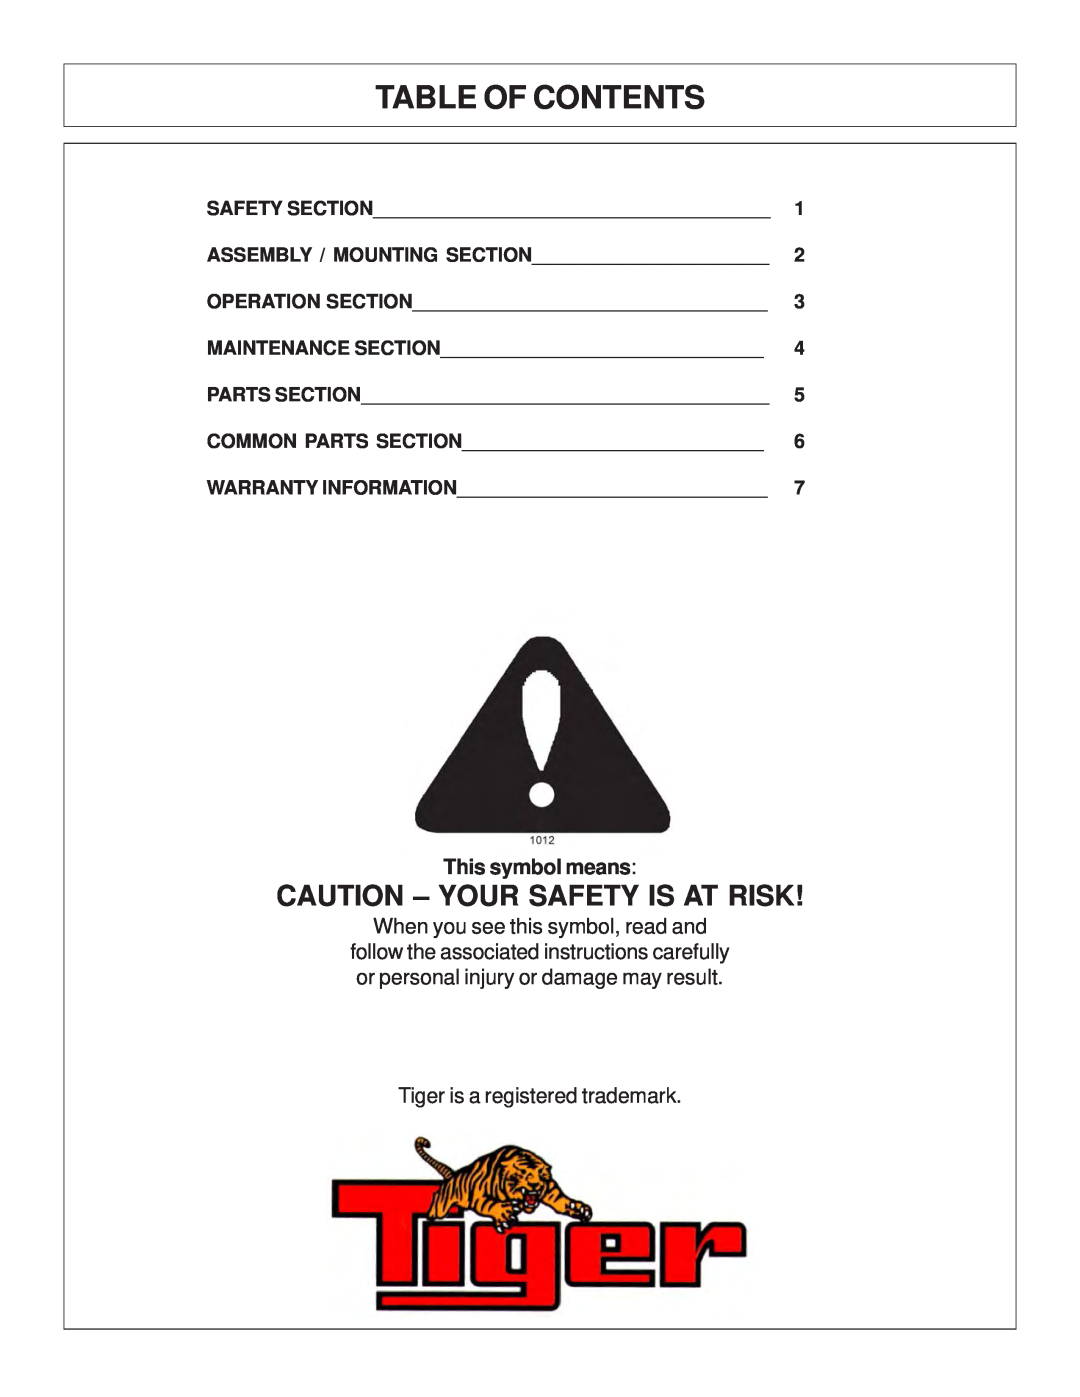 Tiger Products Co., Ltd 5101E, 5083E, 5093E manual Table Of Contents, Caution – Your Safety Is At Risk, This symbol means 